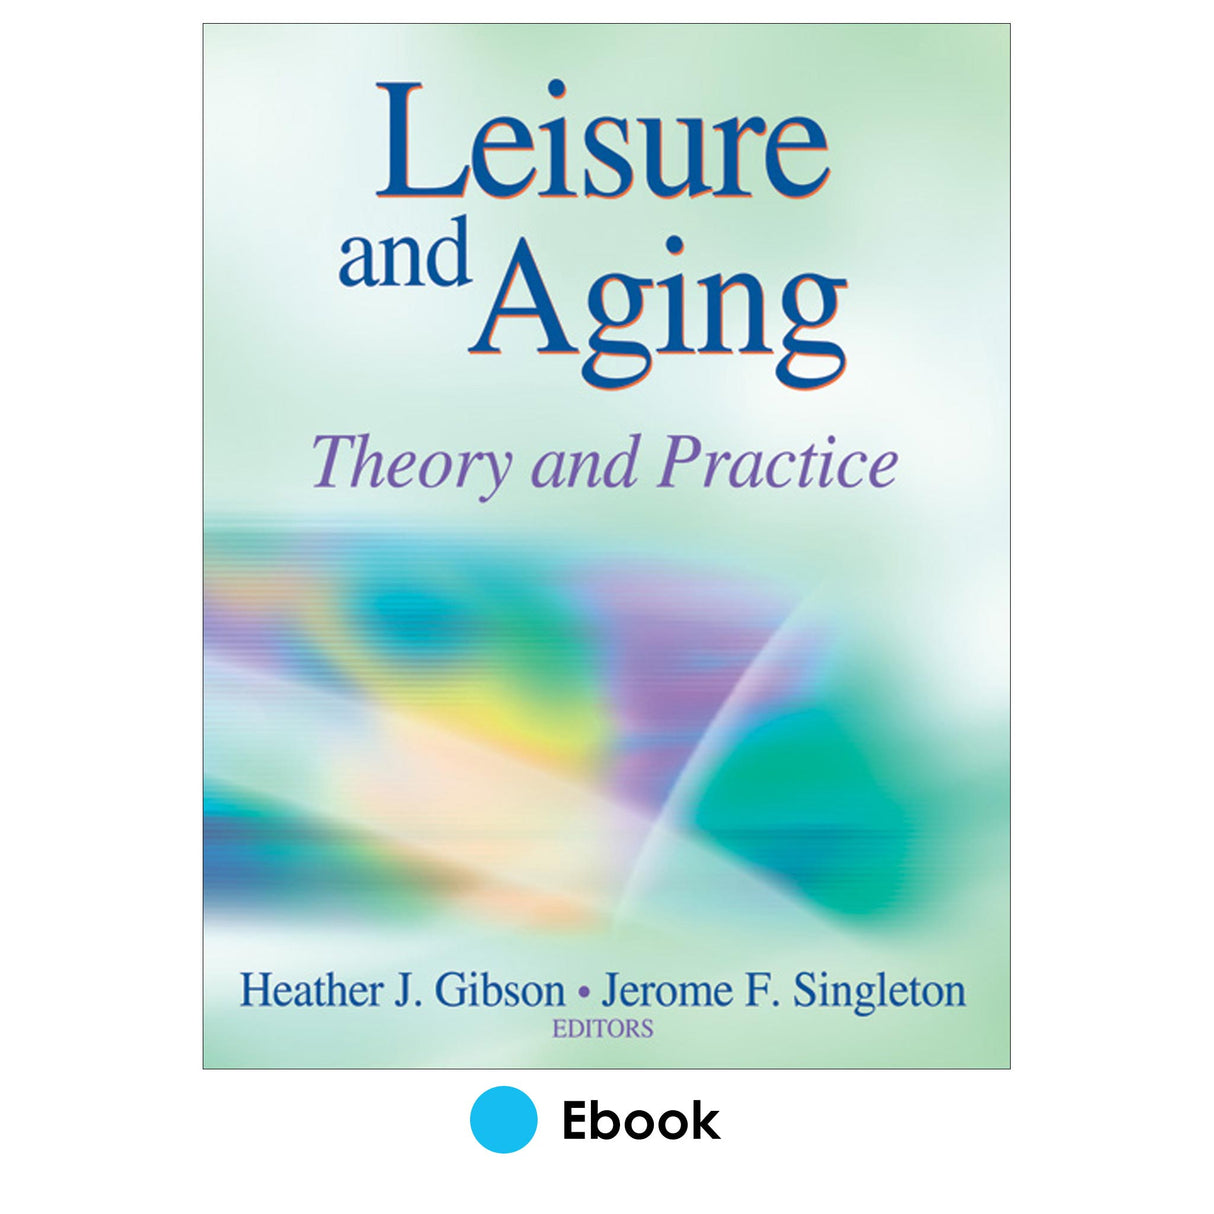 Leisure and Aging PDF